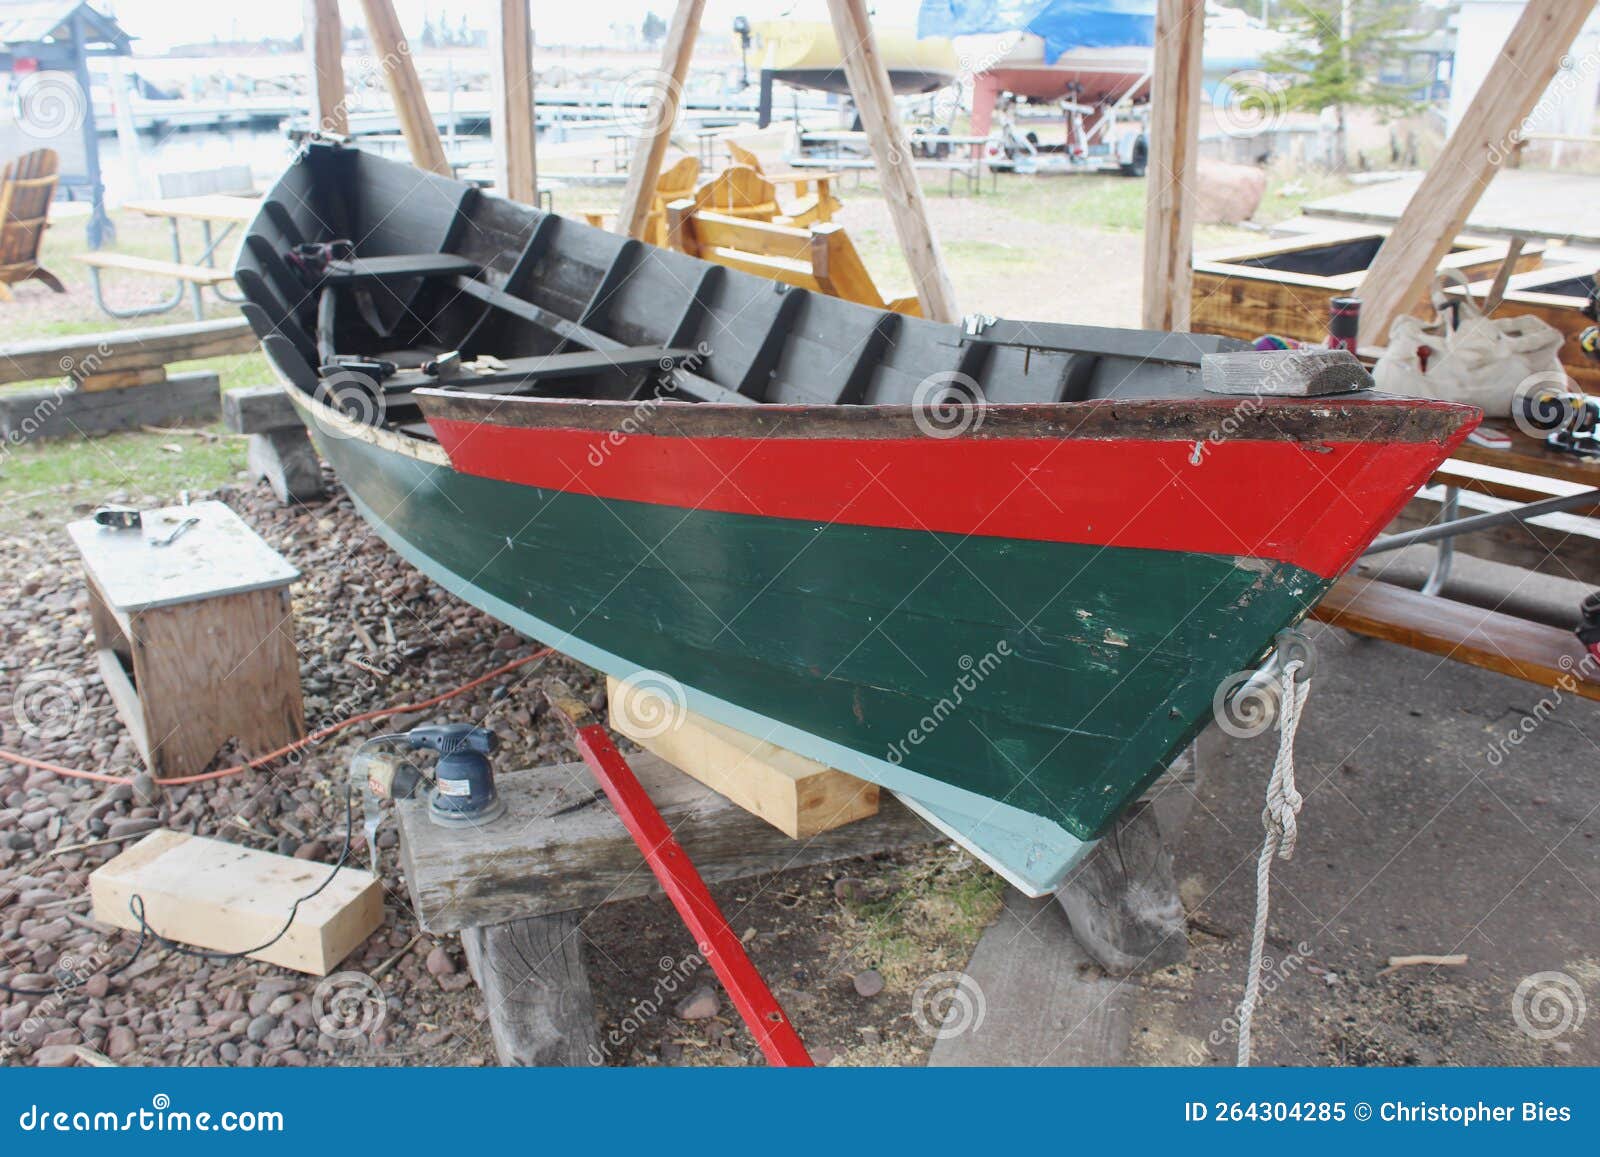 Wooden Boat Painted Green and Red Under Repair Stock Image - Image of  brilliant, parts: 264304285